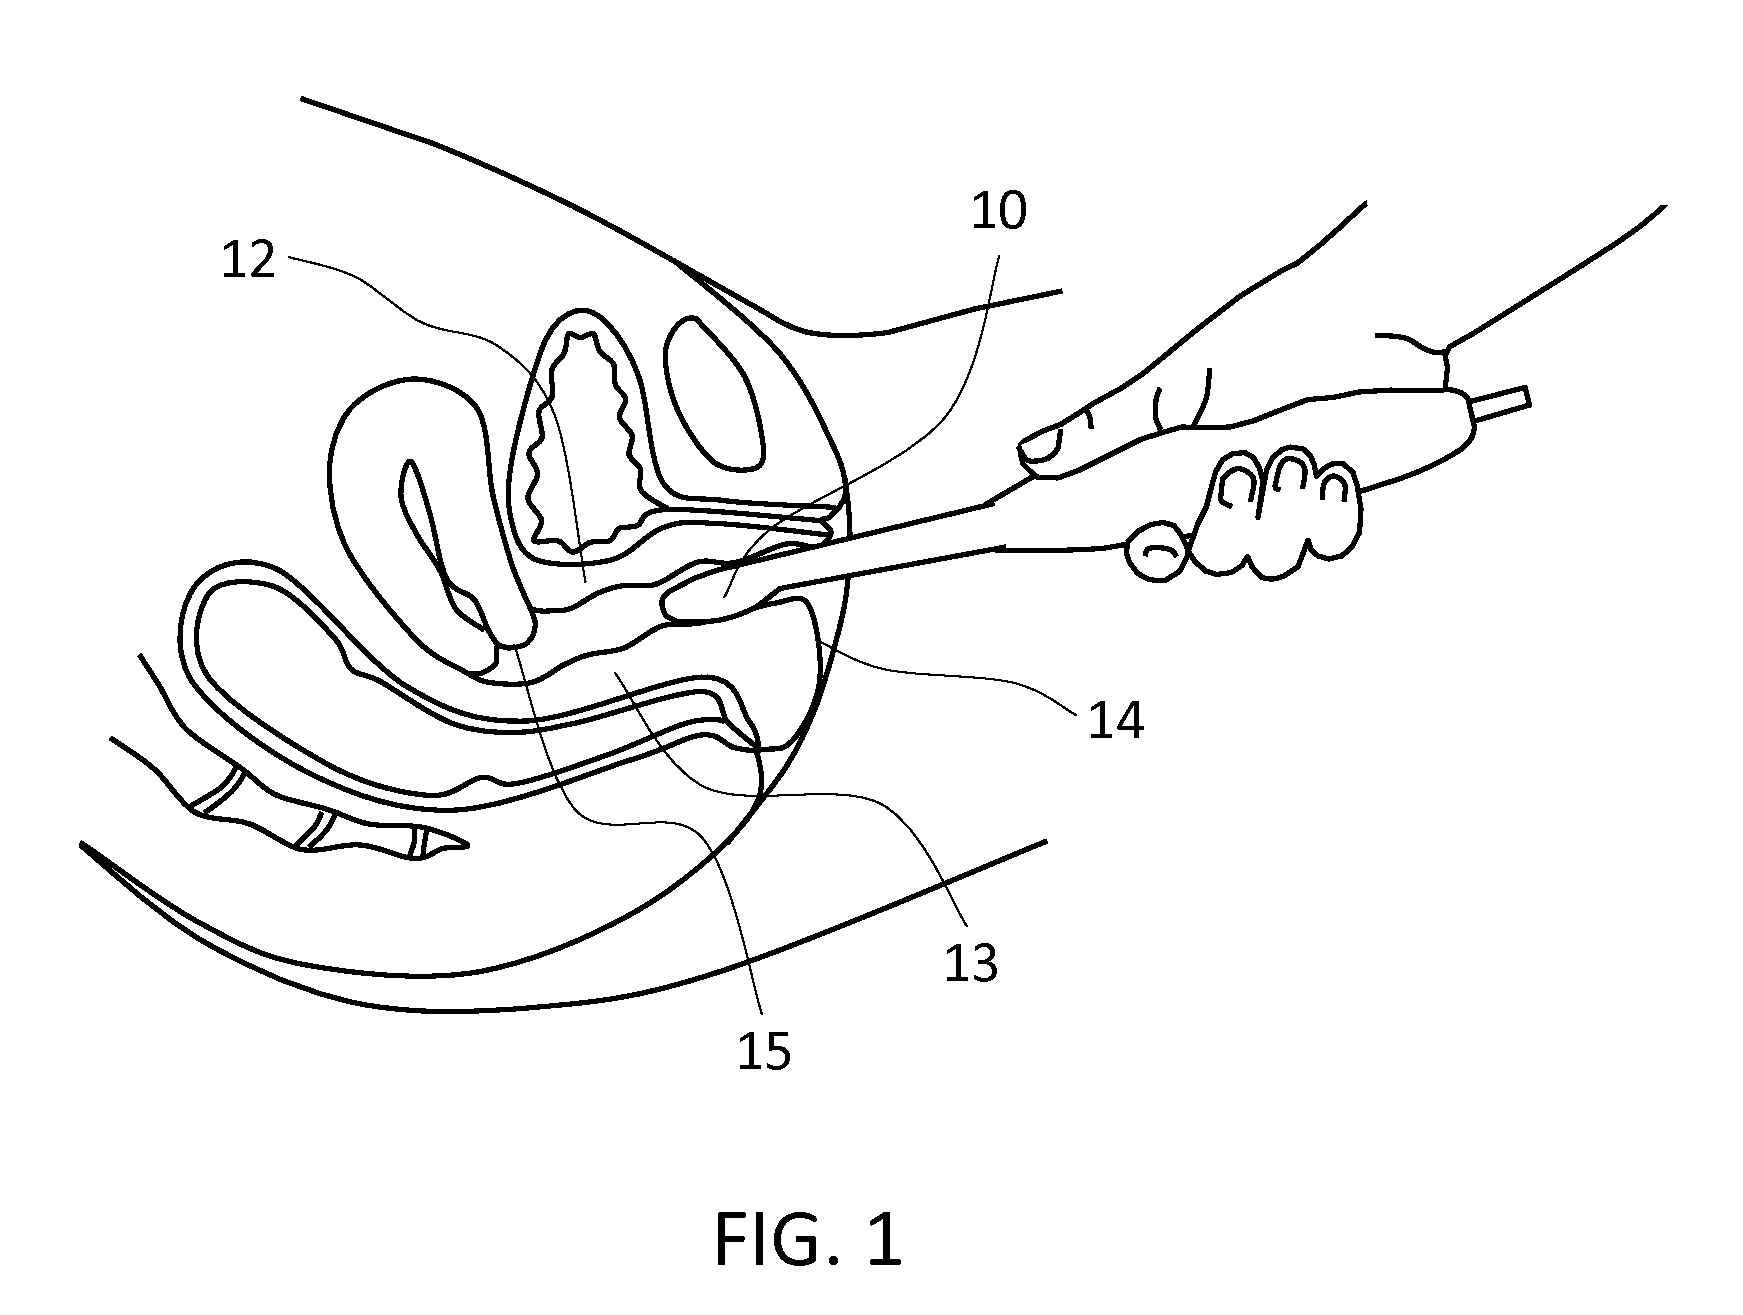 Methods for characterizing vaginal tissue elasticity